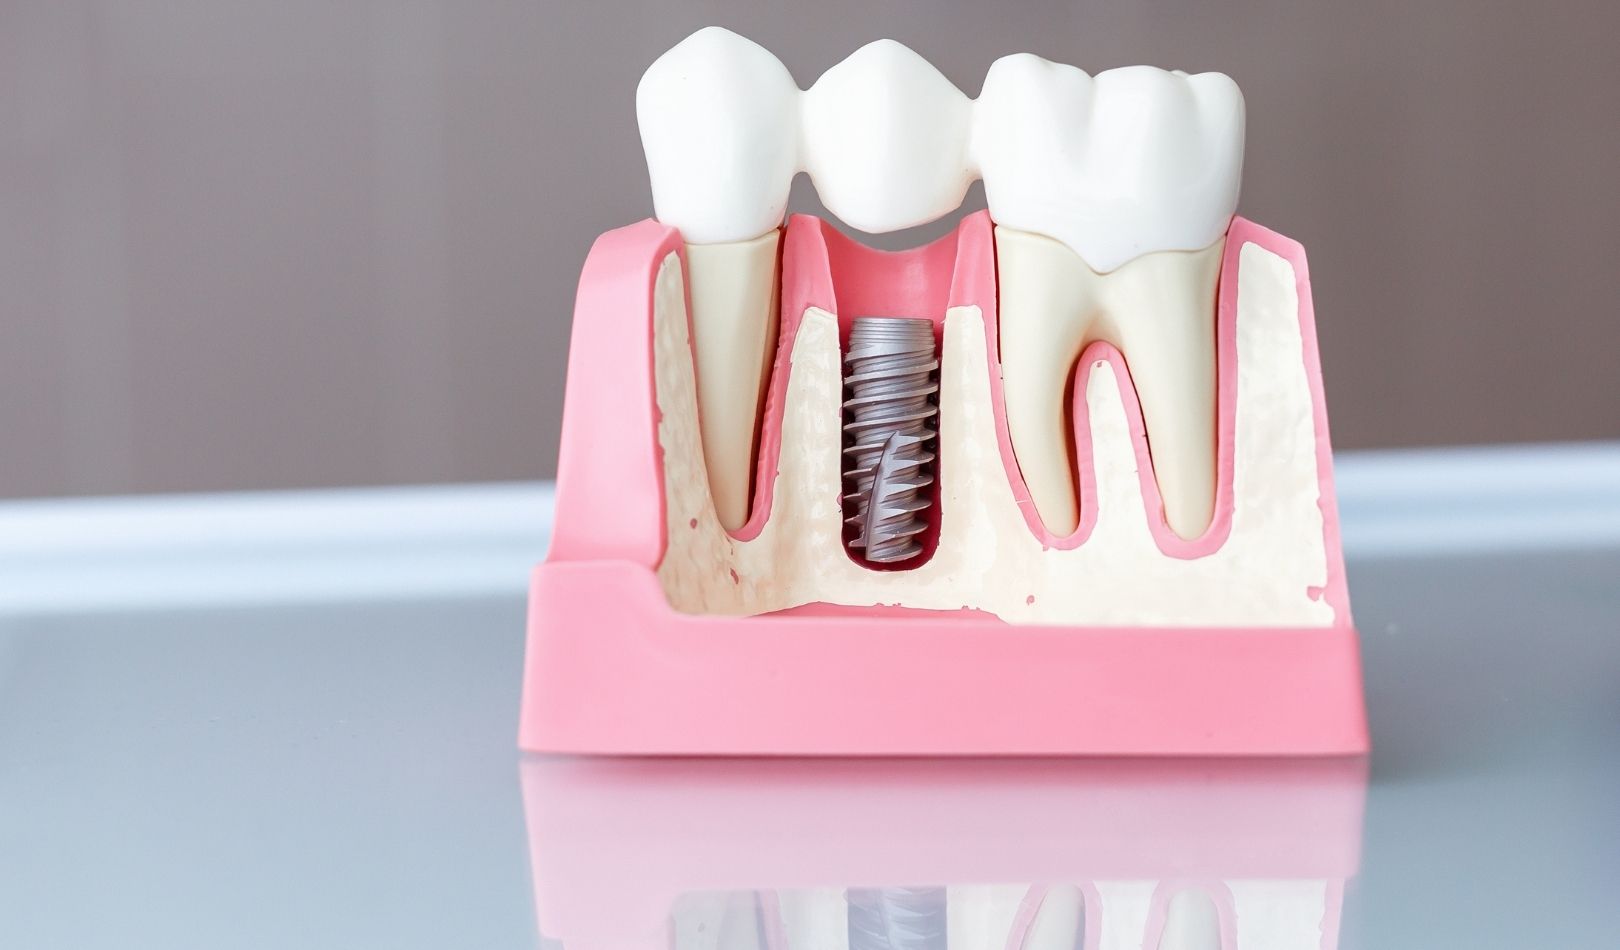 Do certain medical conditions impact eligibility for dental implants?
